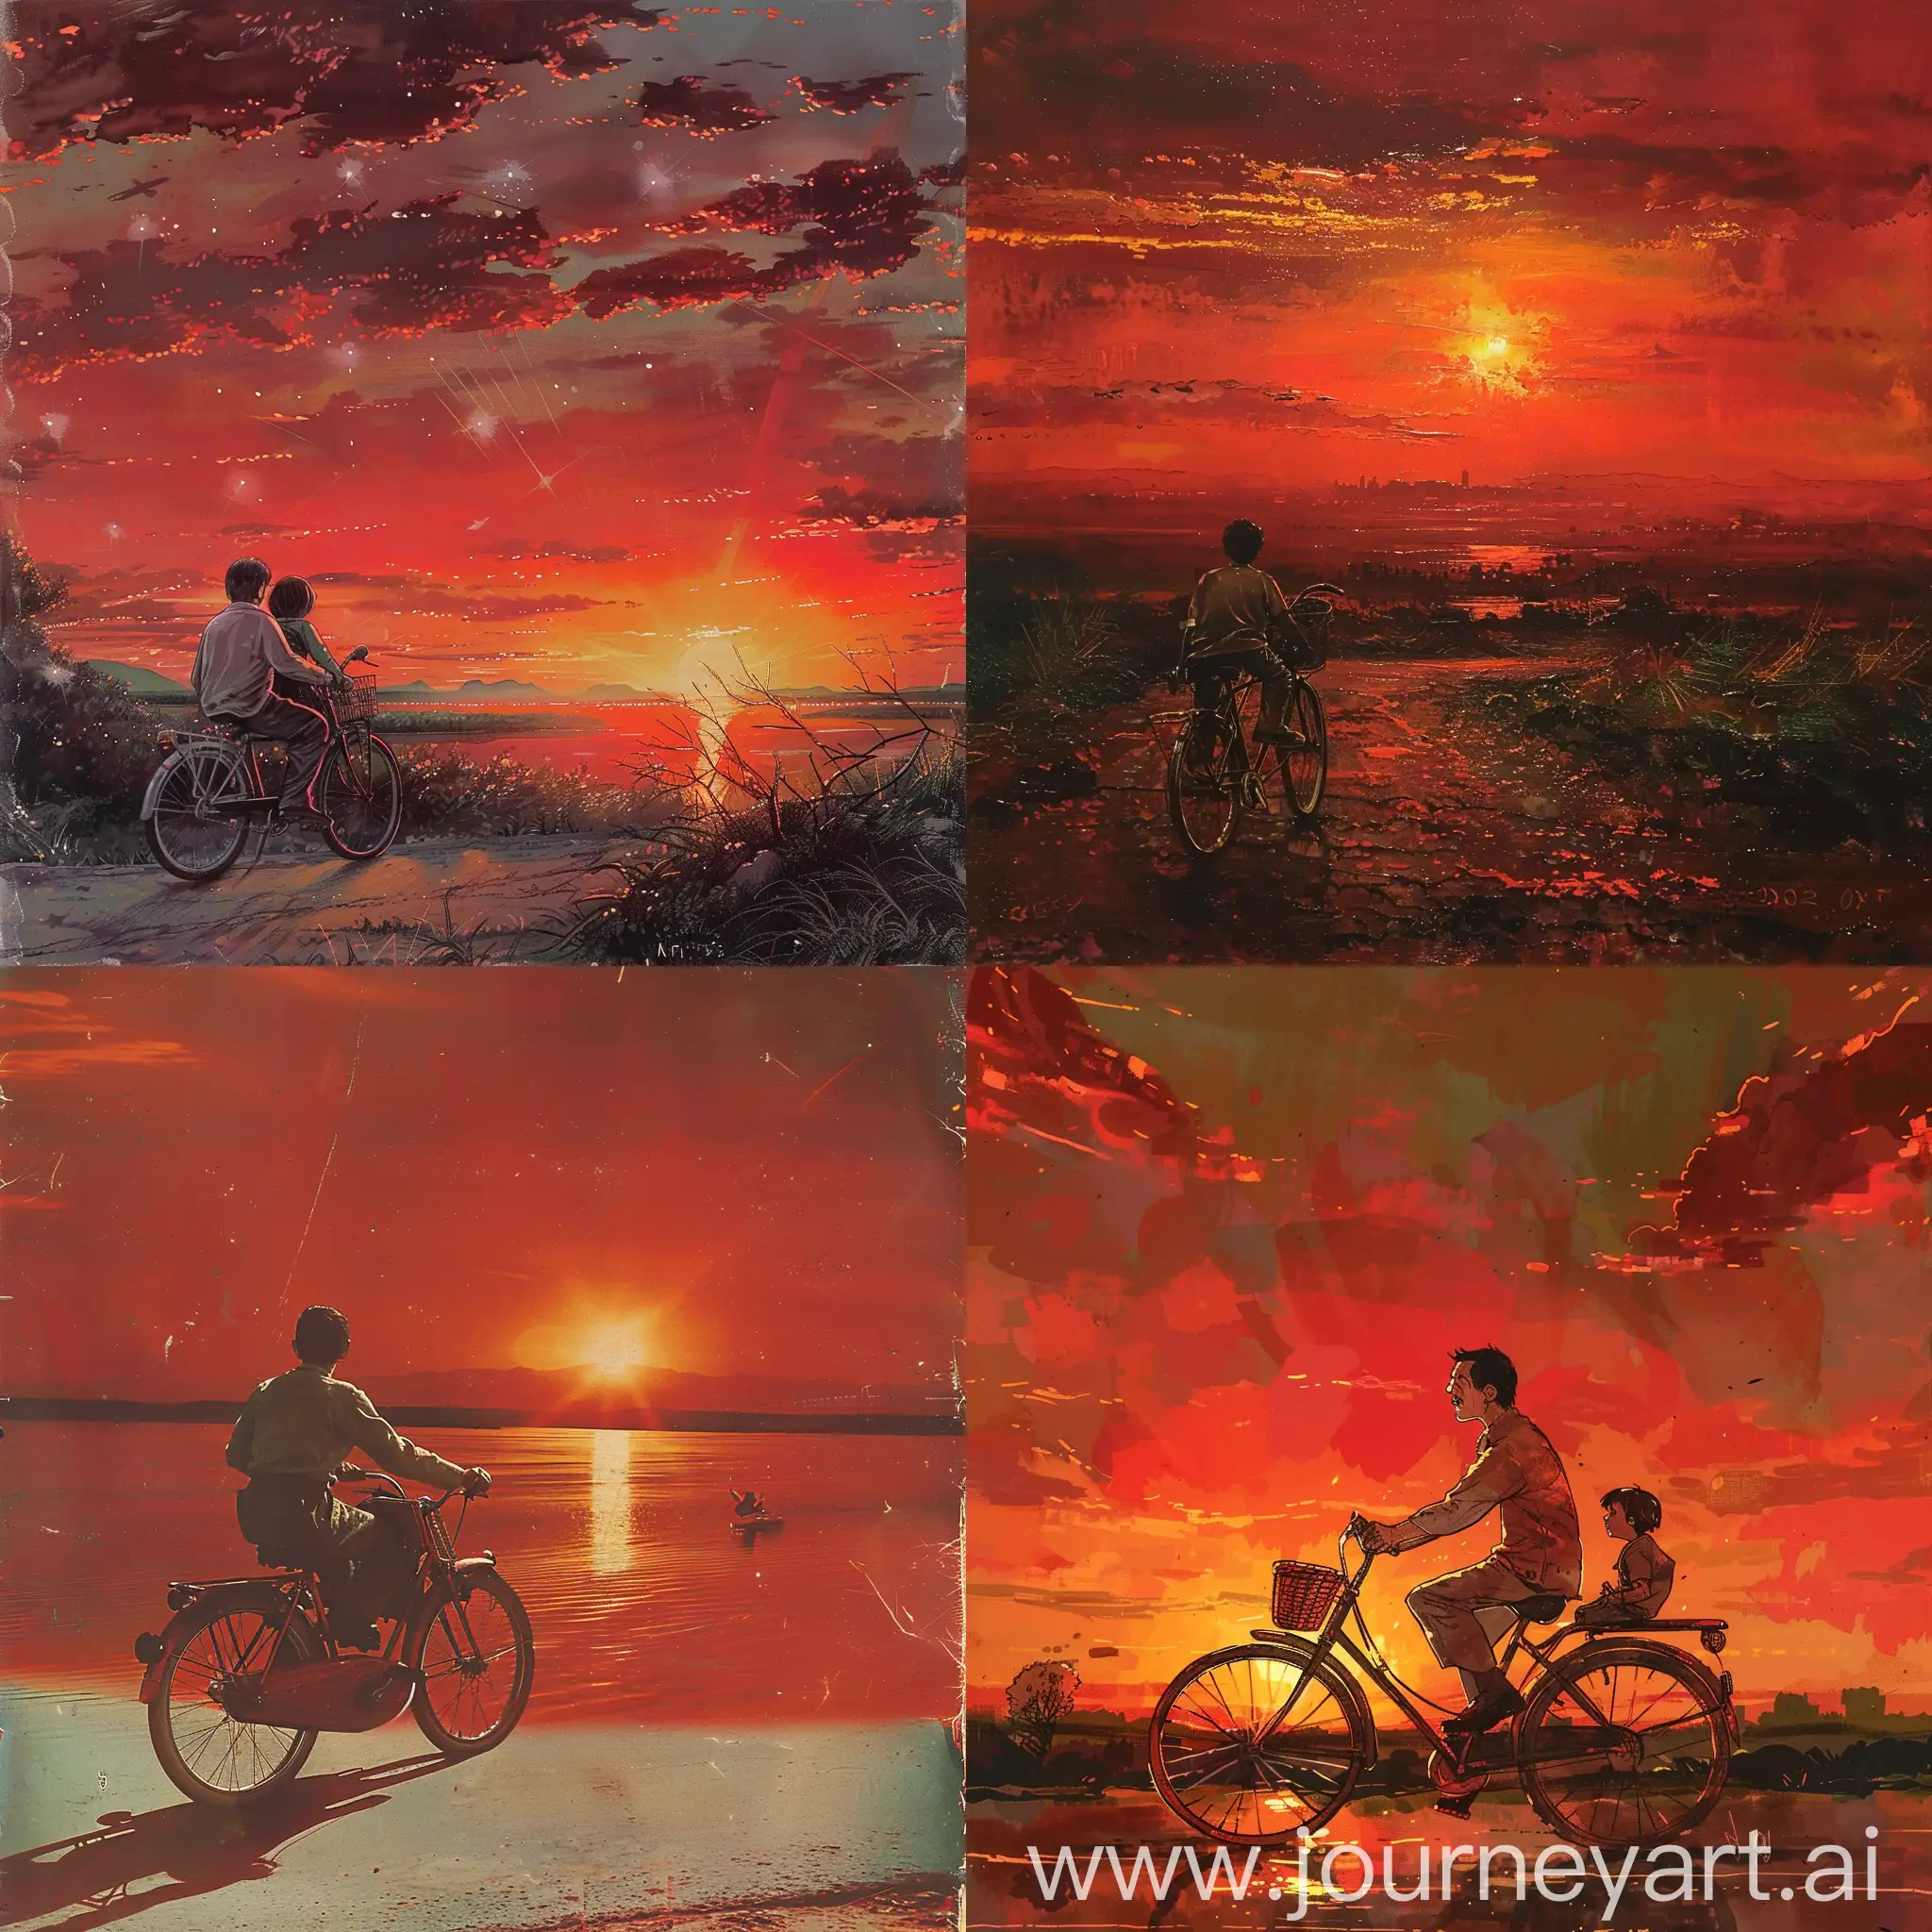 Father-and-Child-Riding-Vintage-Bicycle-into-Sunset